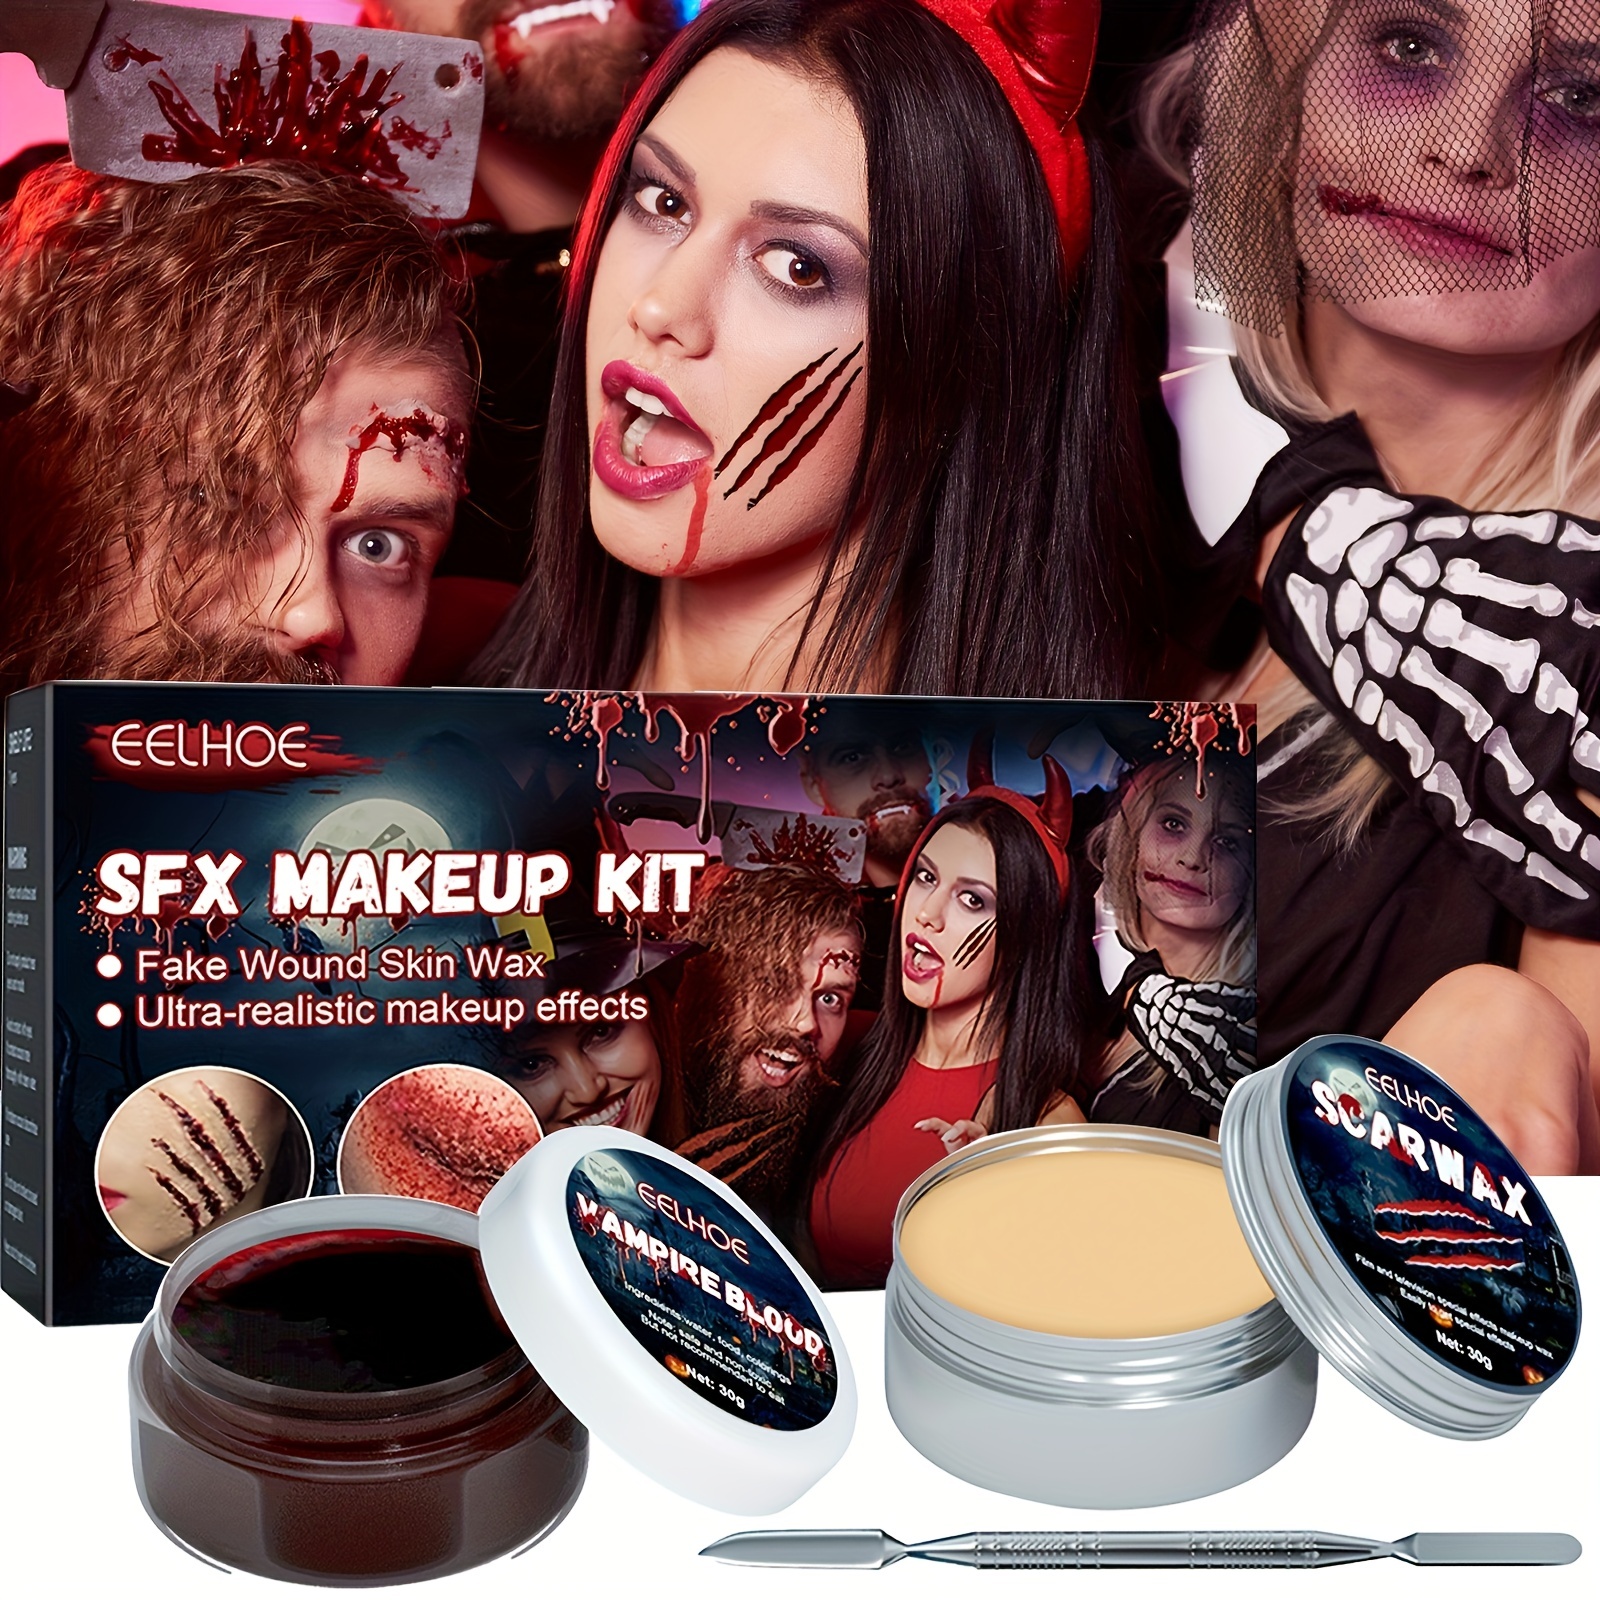 Mehron Makeup Special FX Makeup Kit for Halloween, Horror, Cosplay, Trauma,  Blood Special Effects, Wounds, Injuries